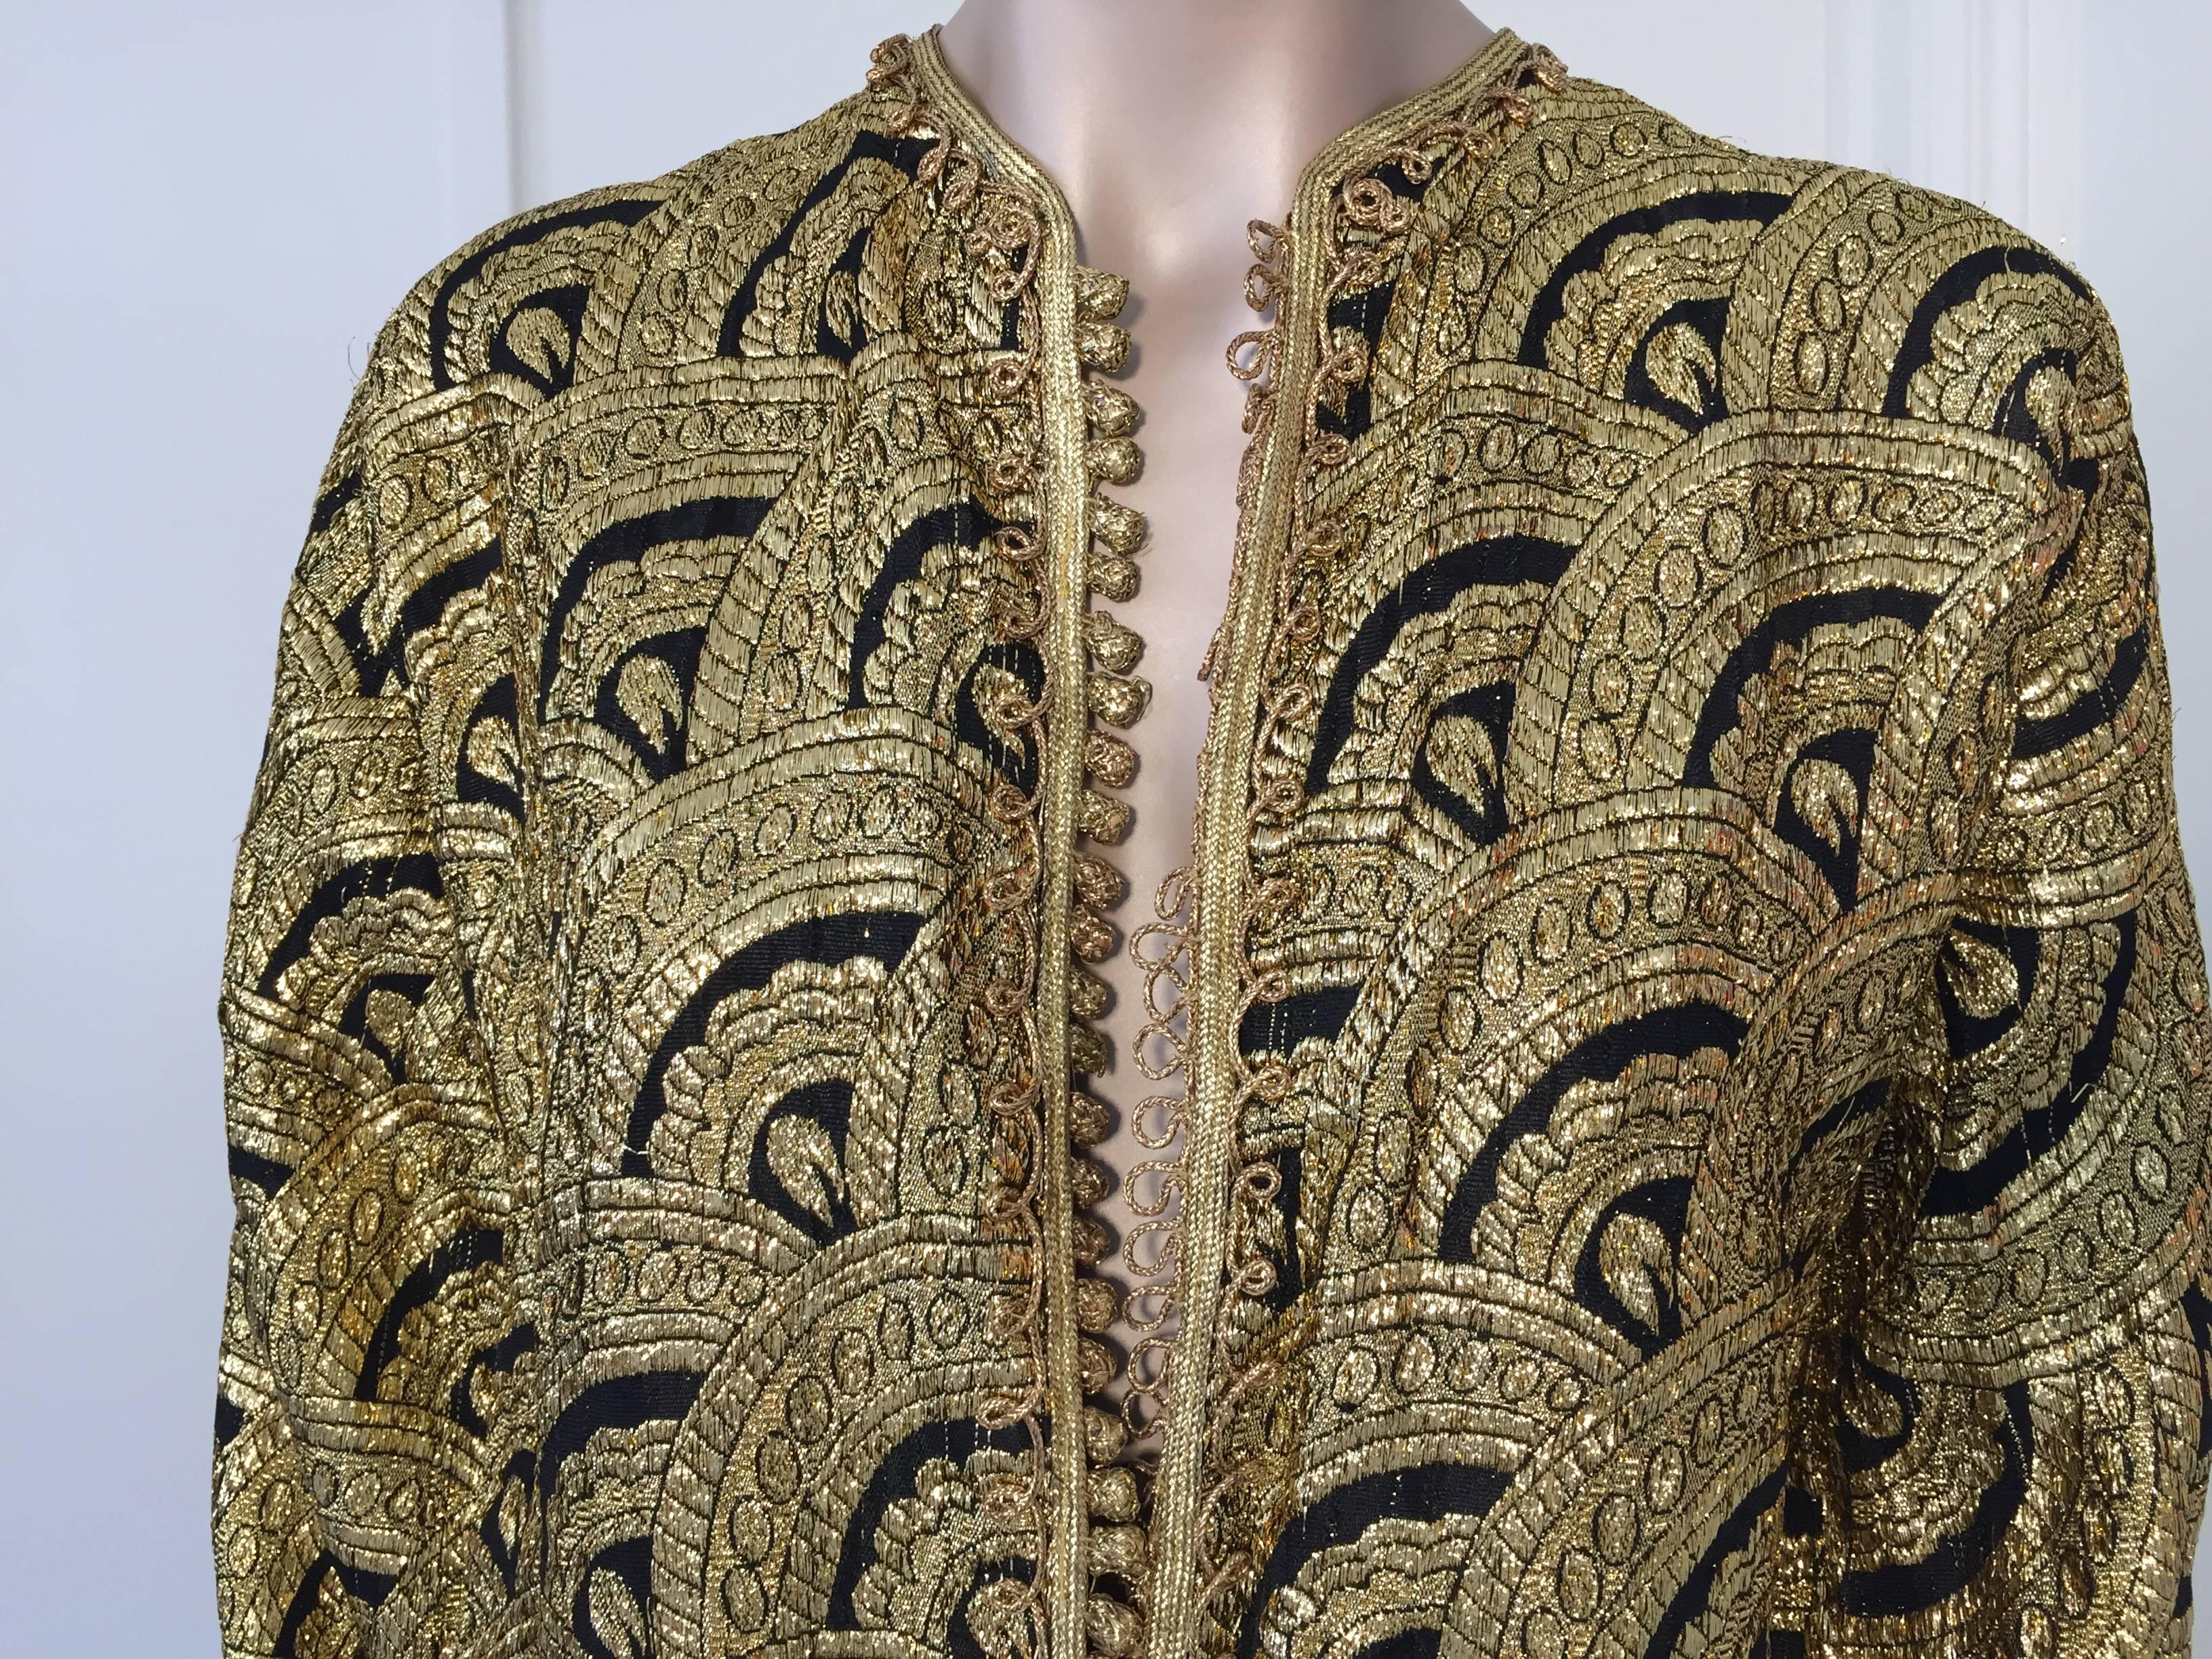 Elegant Moroccan caftan gold and black Art Deco style brocade silk fabric,
circa 1960s.
This kaftan is embroidered and embellished entirely by hand.
One of a kind evening Moroccan Middle Eastern vest.
The kaftan features a traditional neckline and